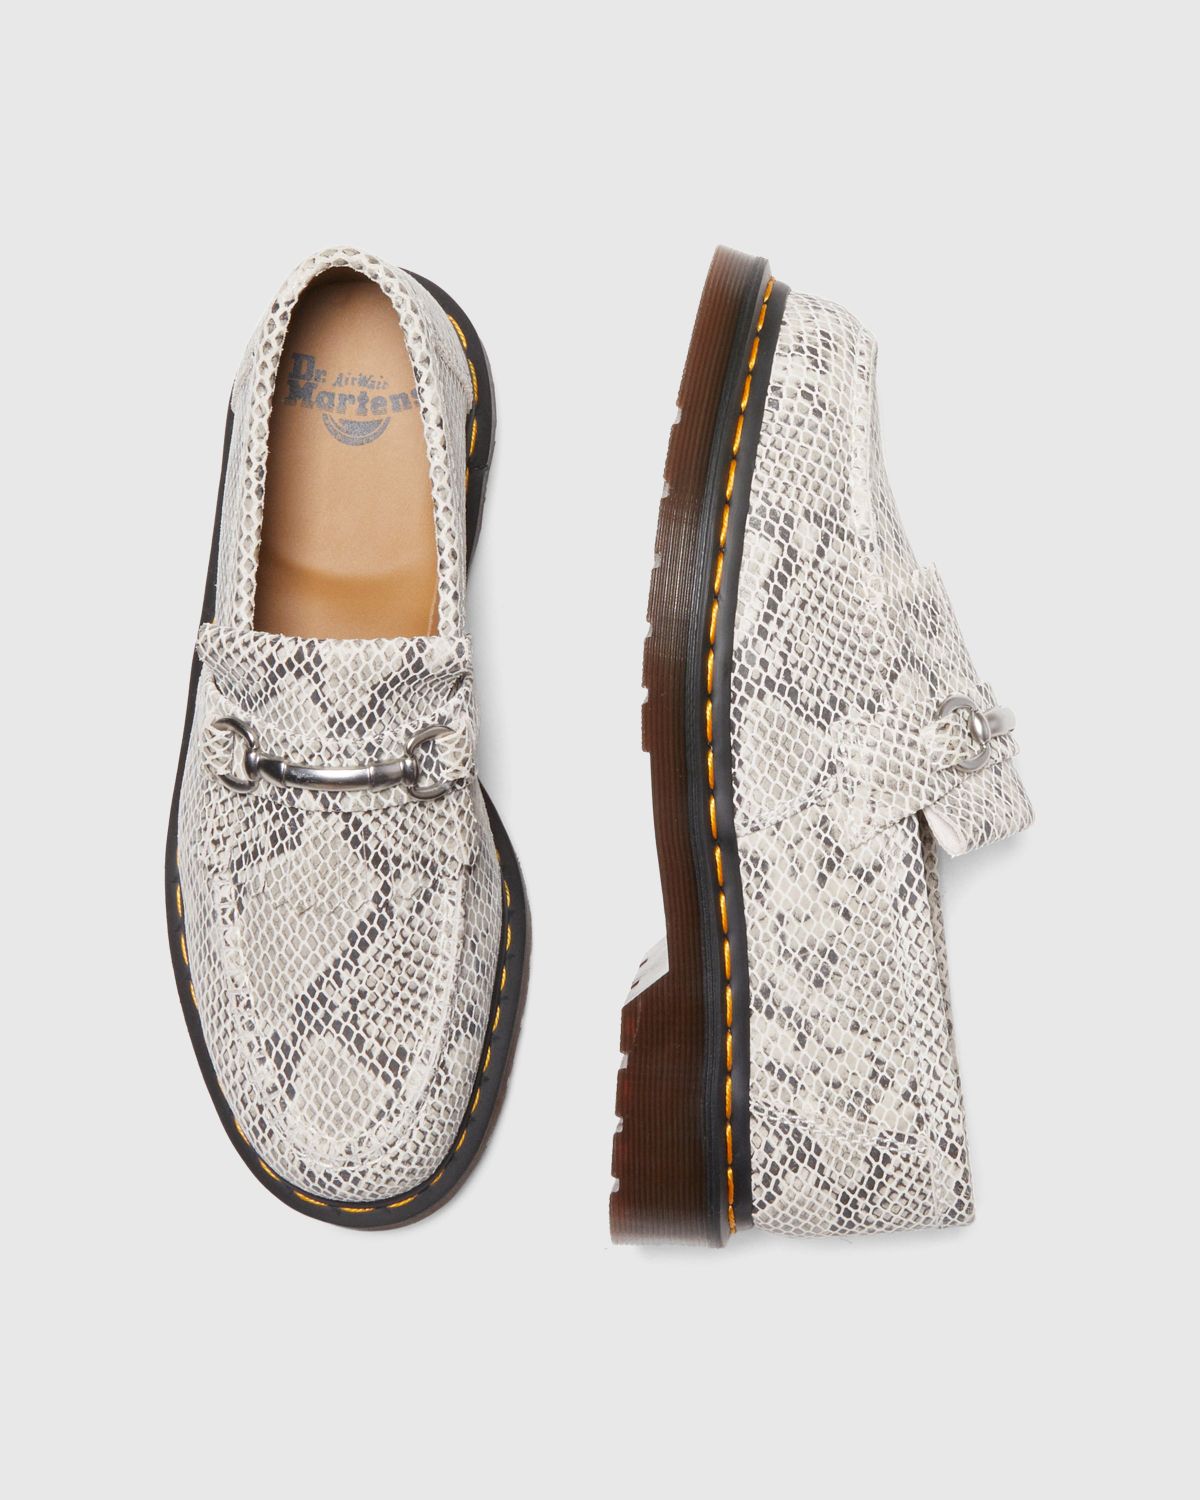 Dr. Martens – Adrian Snaffle Python Print Suede Loafers Sand/Black - Shoes - Grey - Image 4